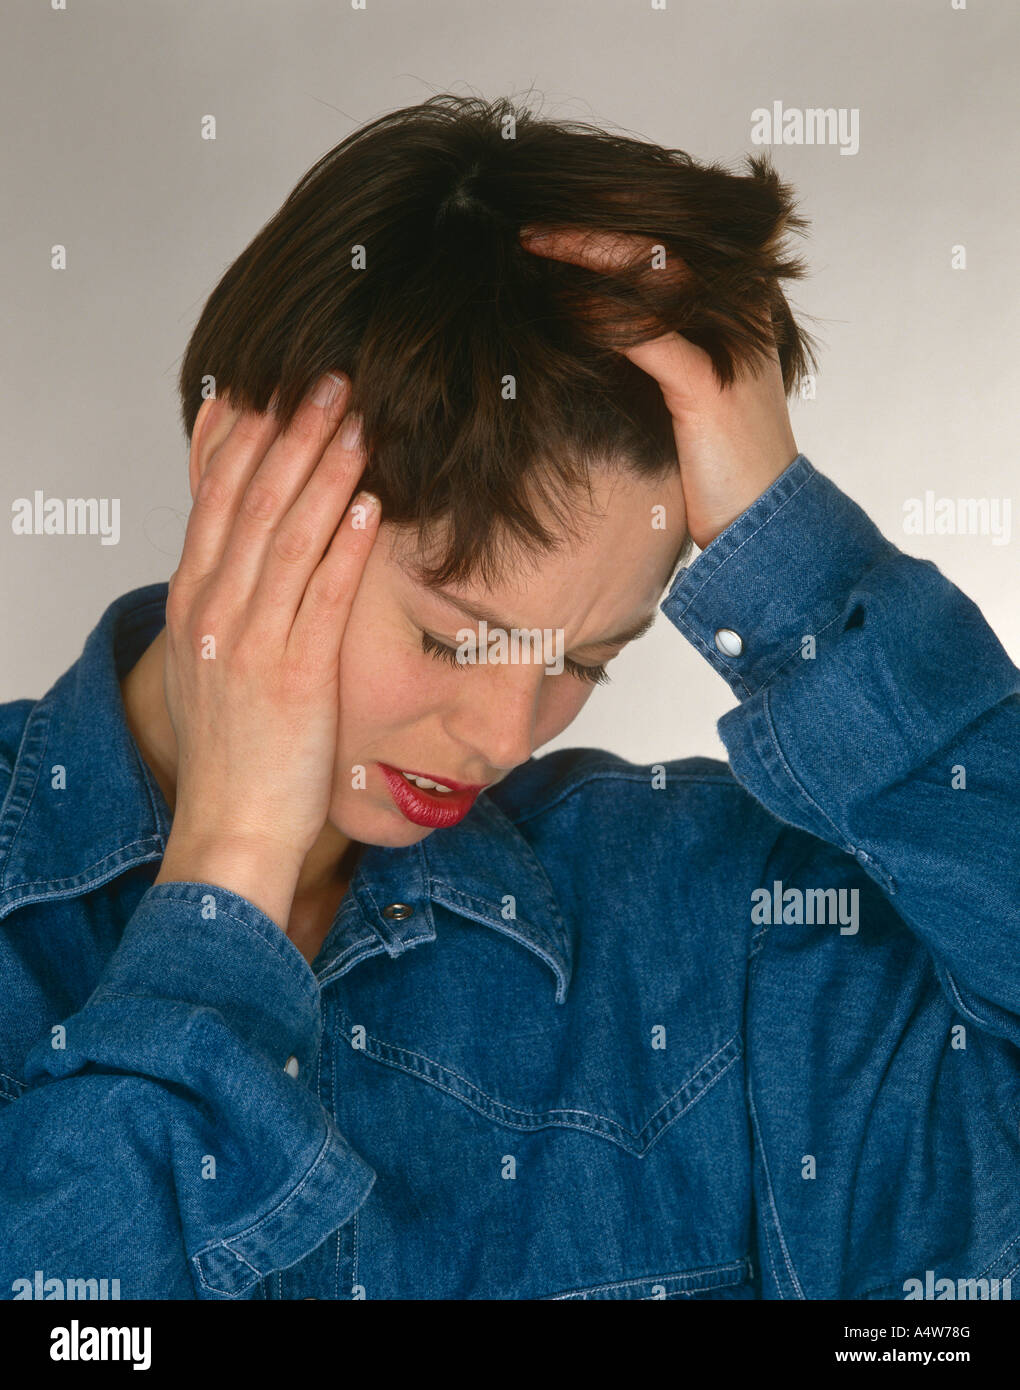 GIRL IN BLUE SHIRT HOLDING HEAD AS IF WITH HEADACHE Stock Photo